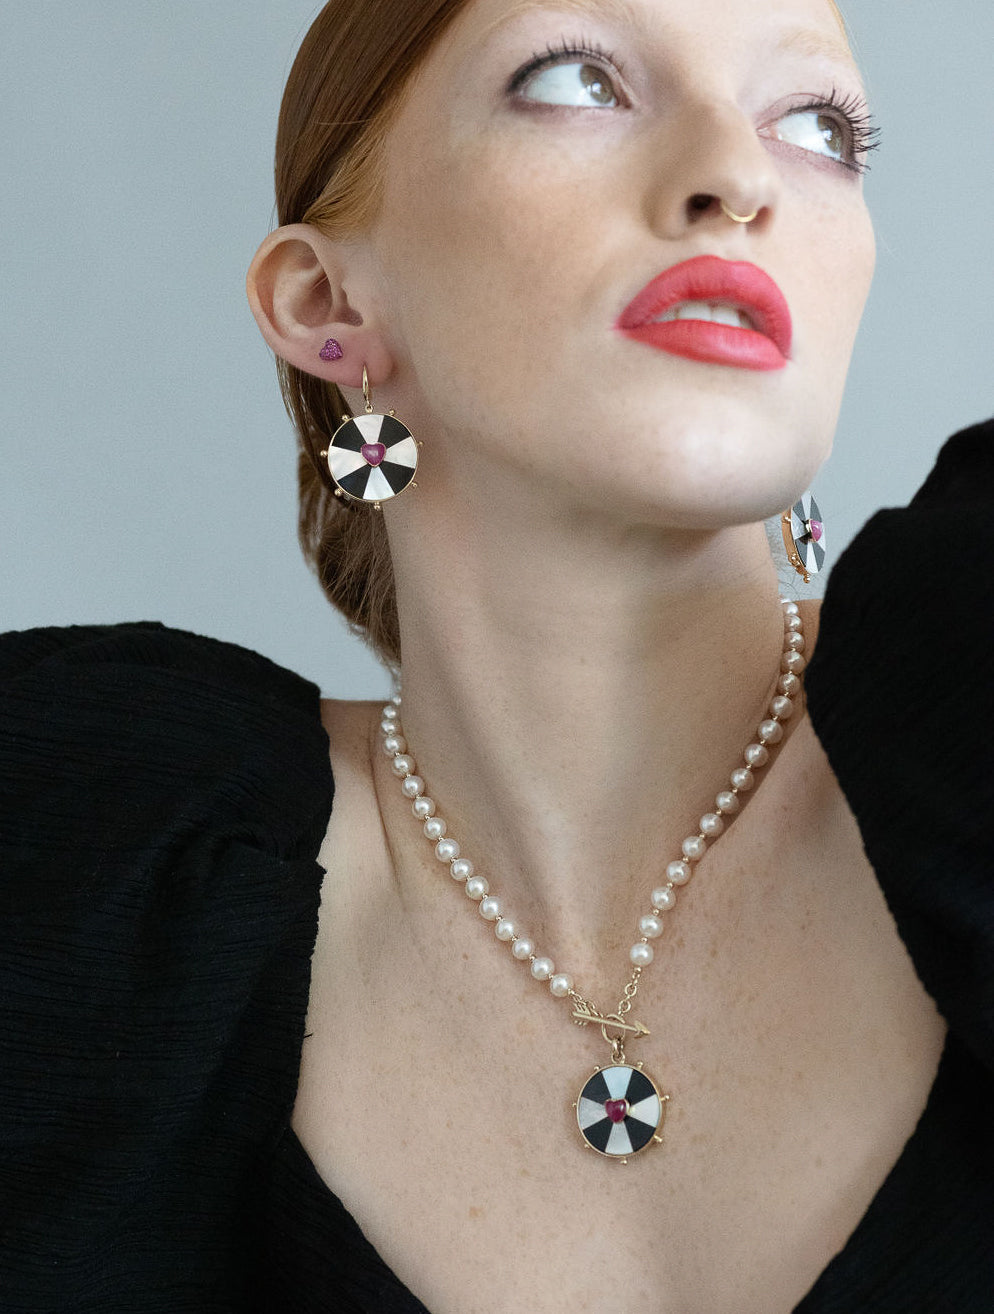 red head model wearing both the bullseye necklace and earrings on a grey background